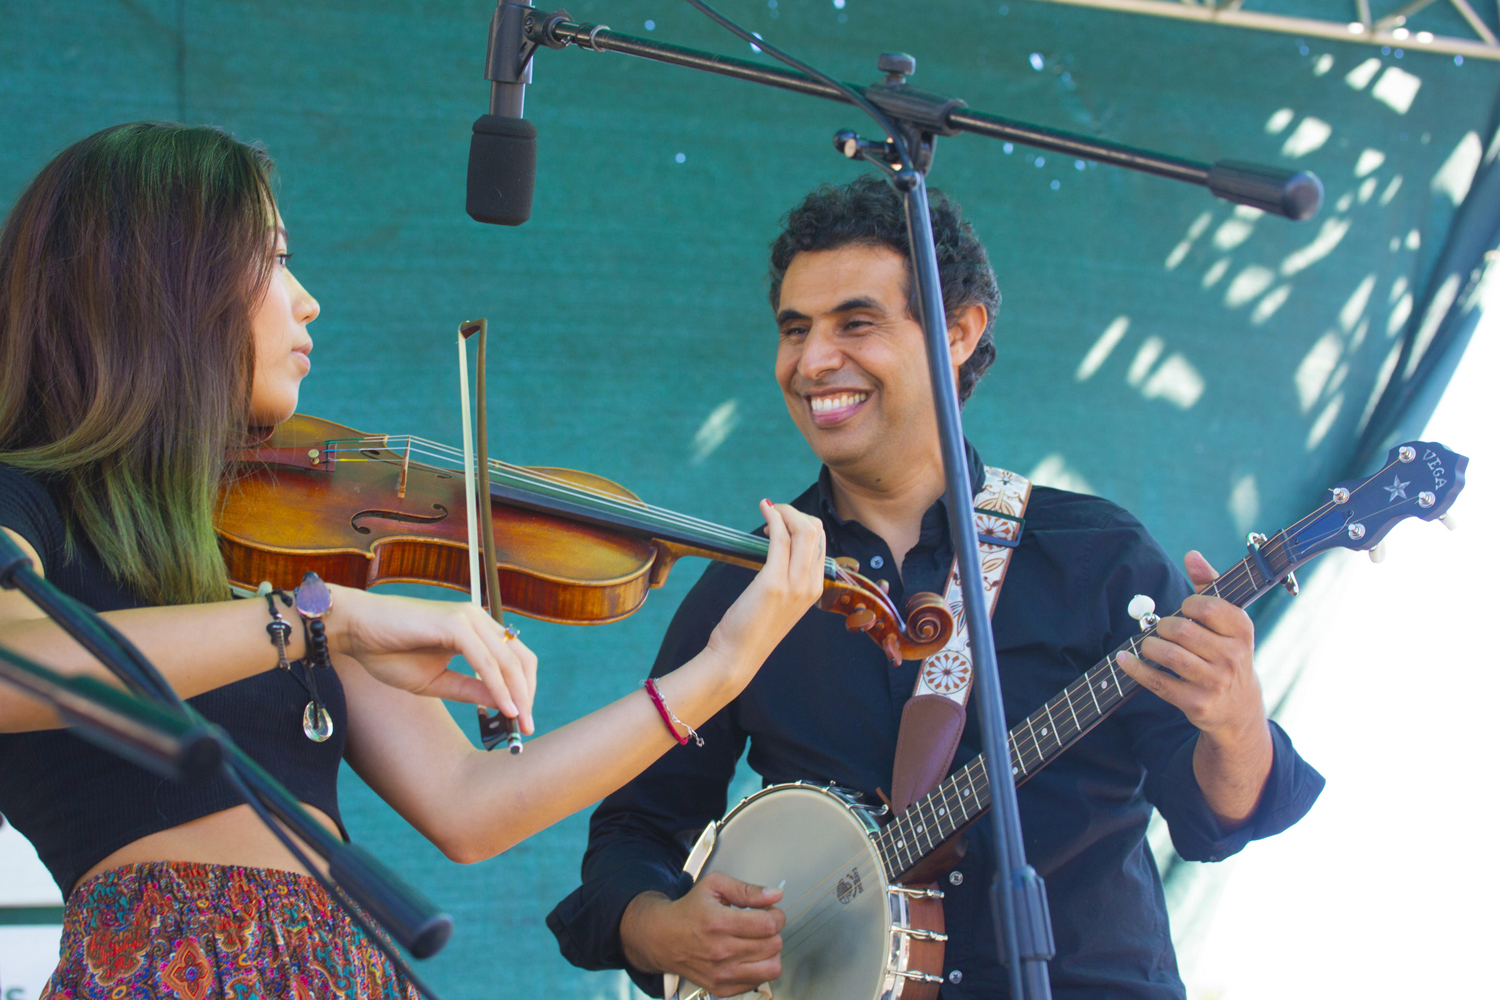 Aza brings Moroccan fusion music to the Church Street Fair stage.